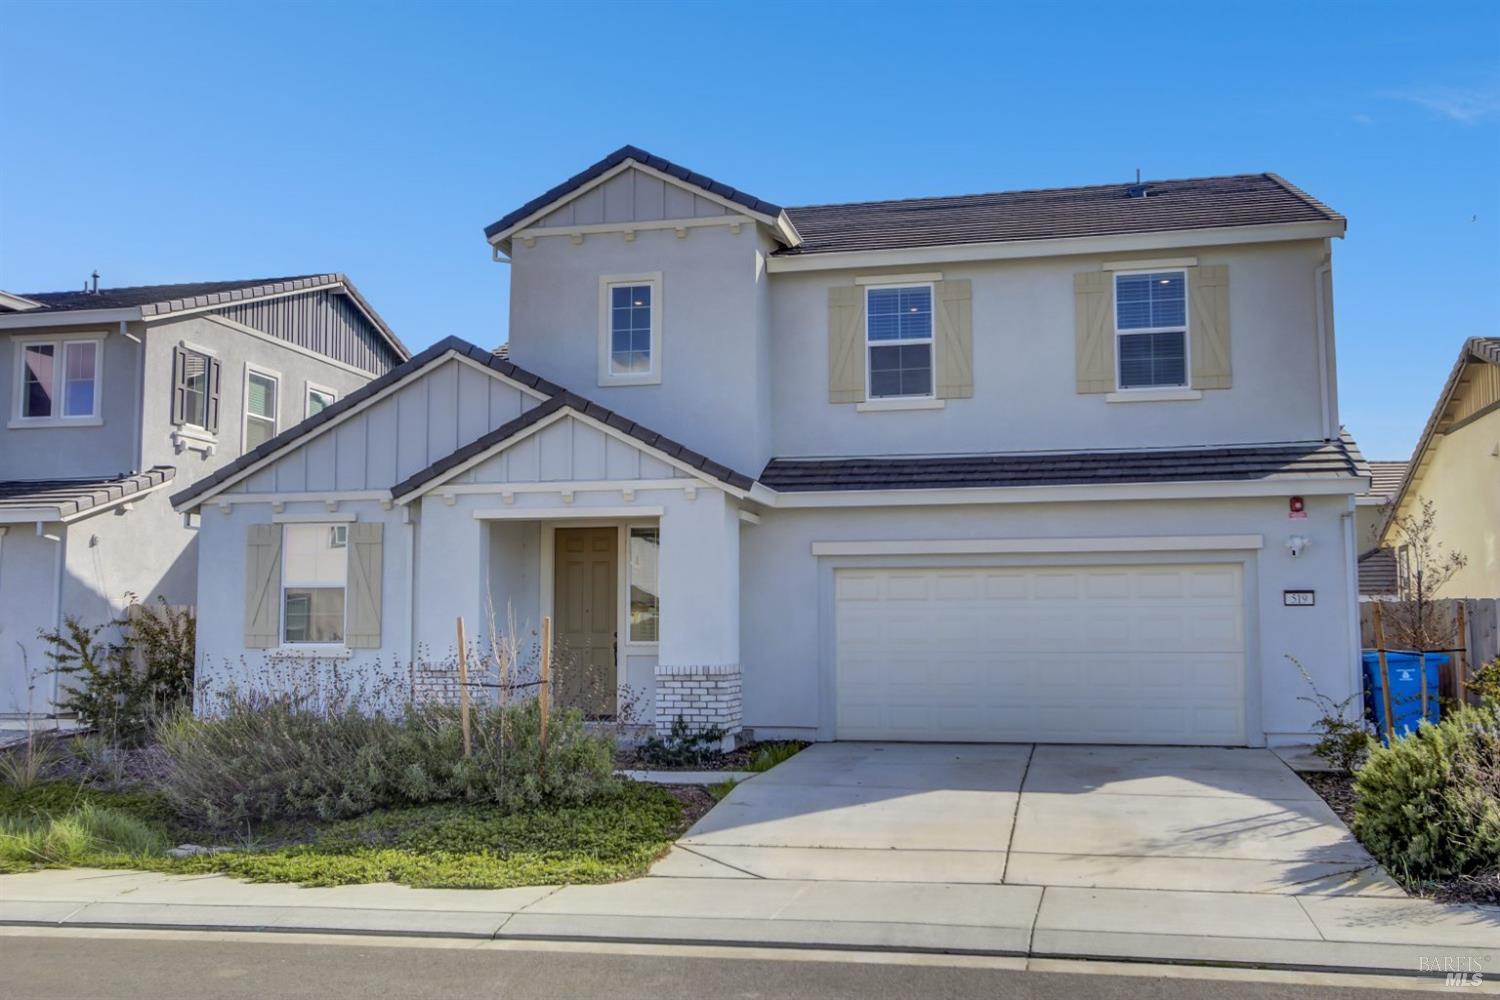 Photo of 519 Coneflower St in Vacaville, CA